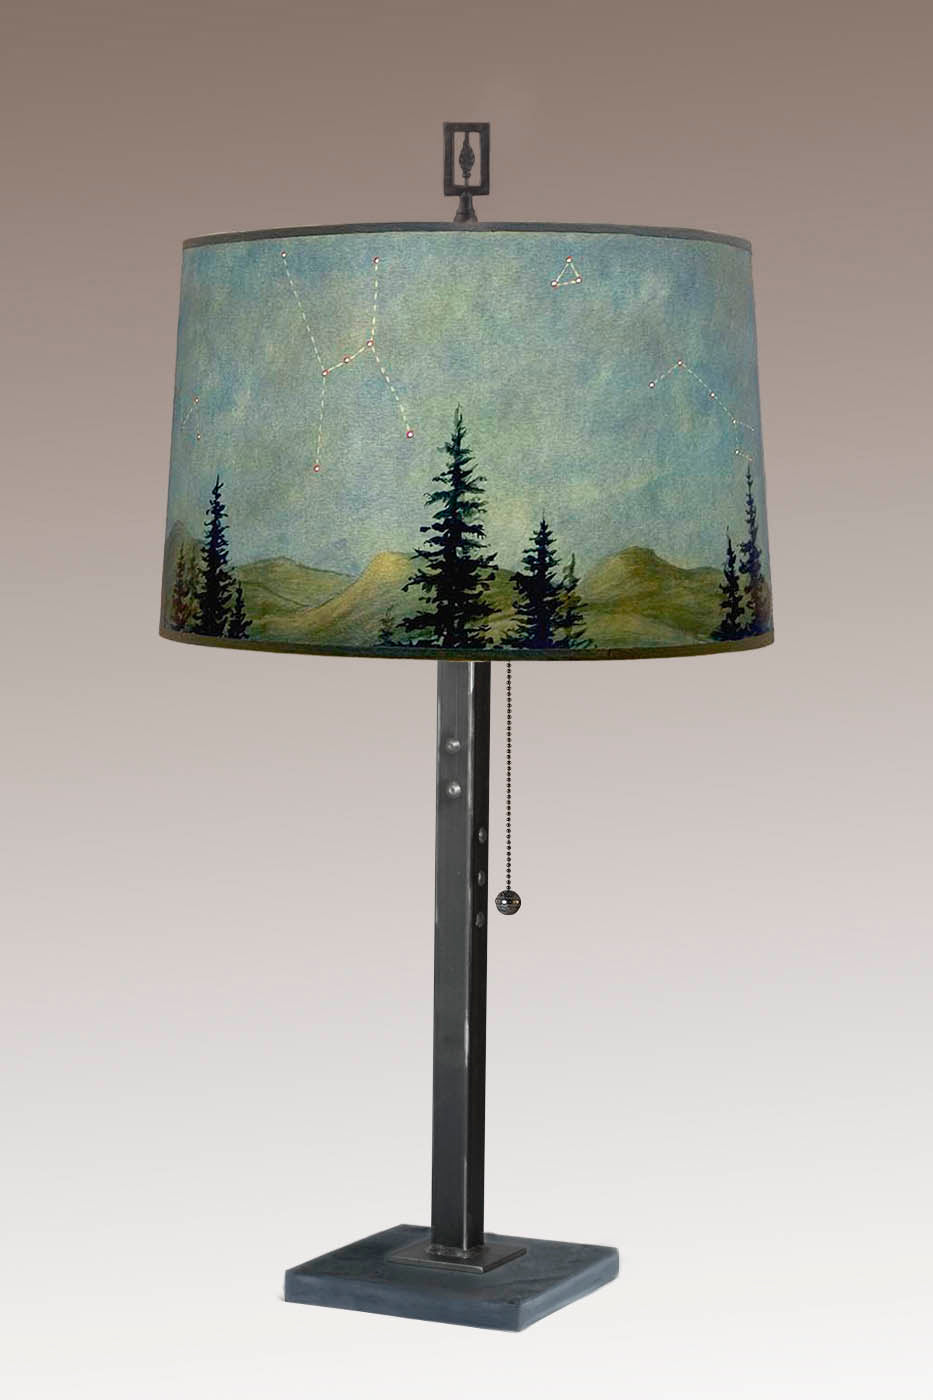 Janna Ugone & Co Table Lamps Steel Table Lamp with Large Drum Shade in Midnight Sky